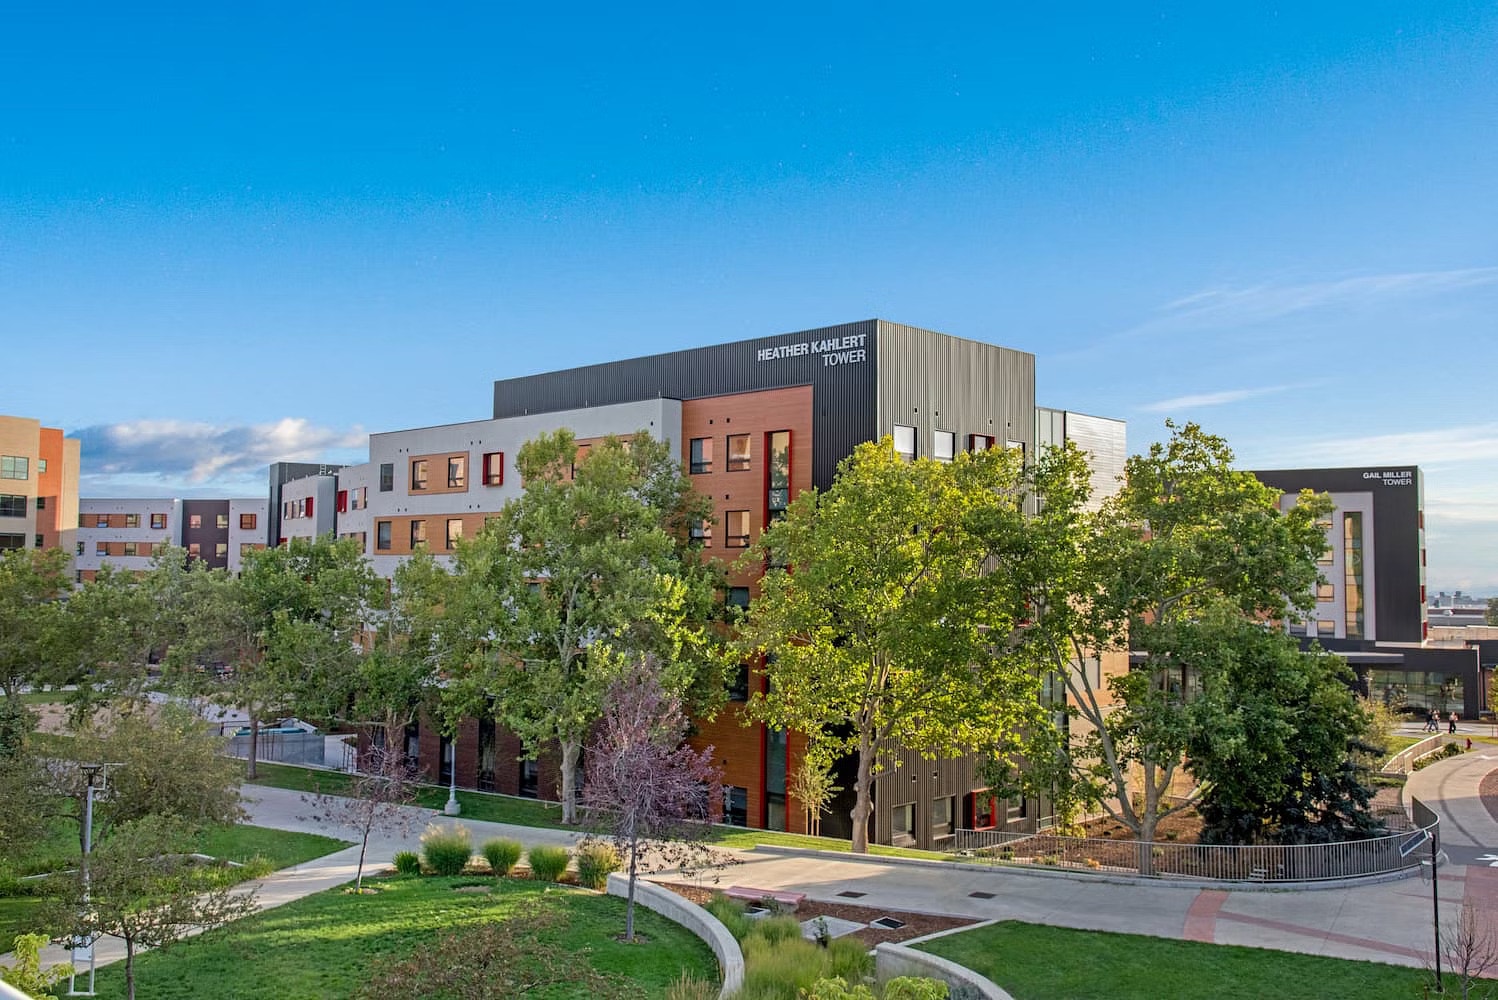 An updated University of Utah dormitory by a large greenery-filled park.